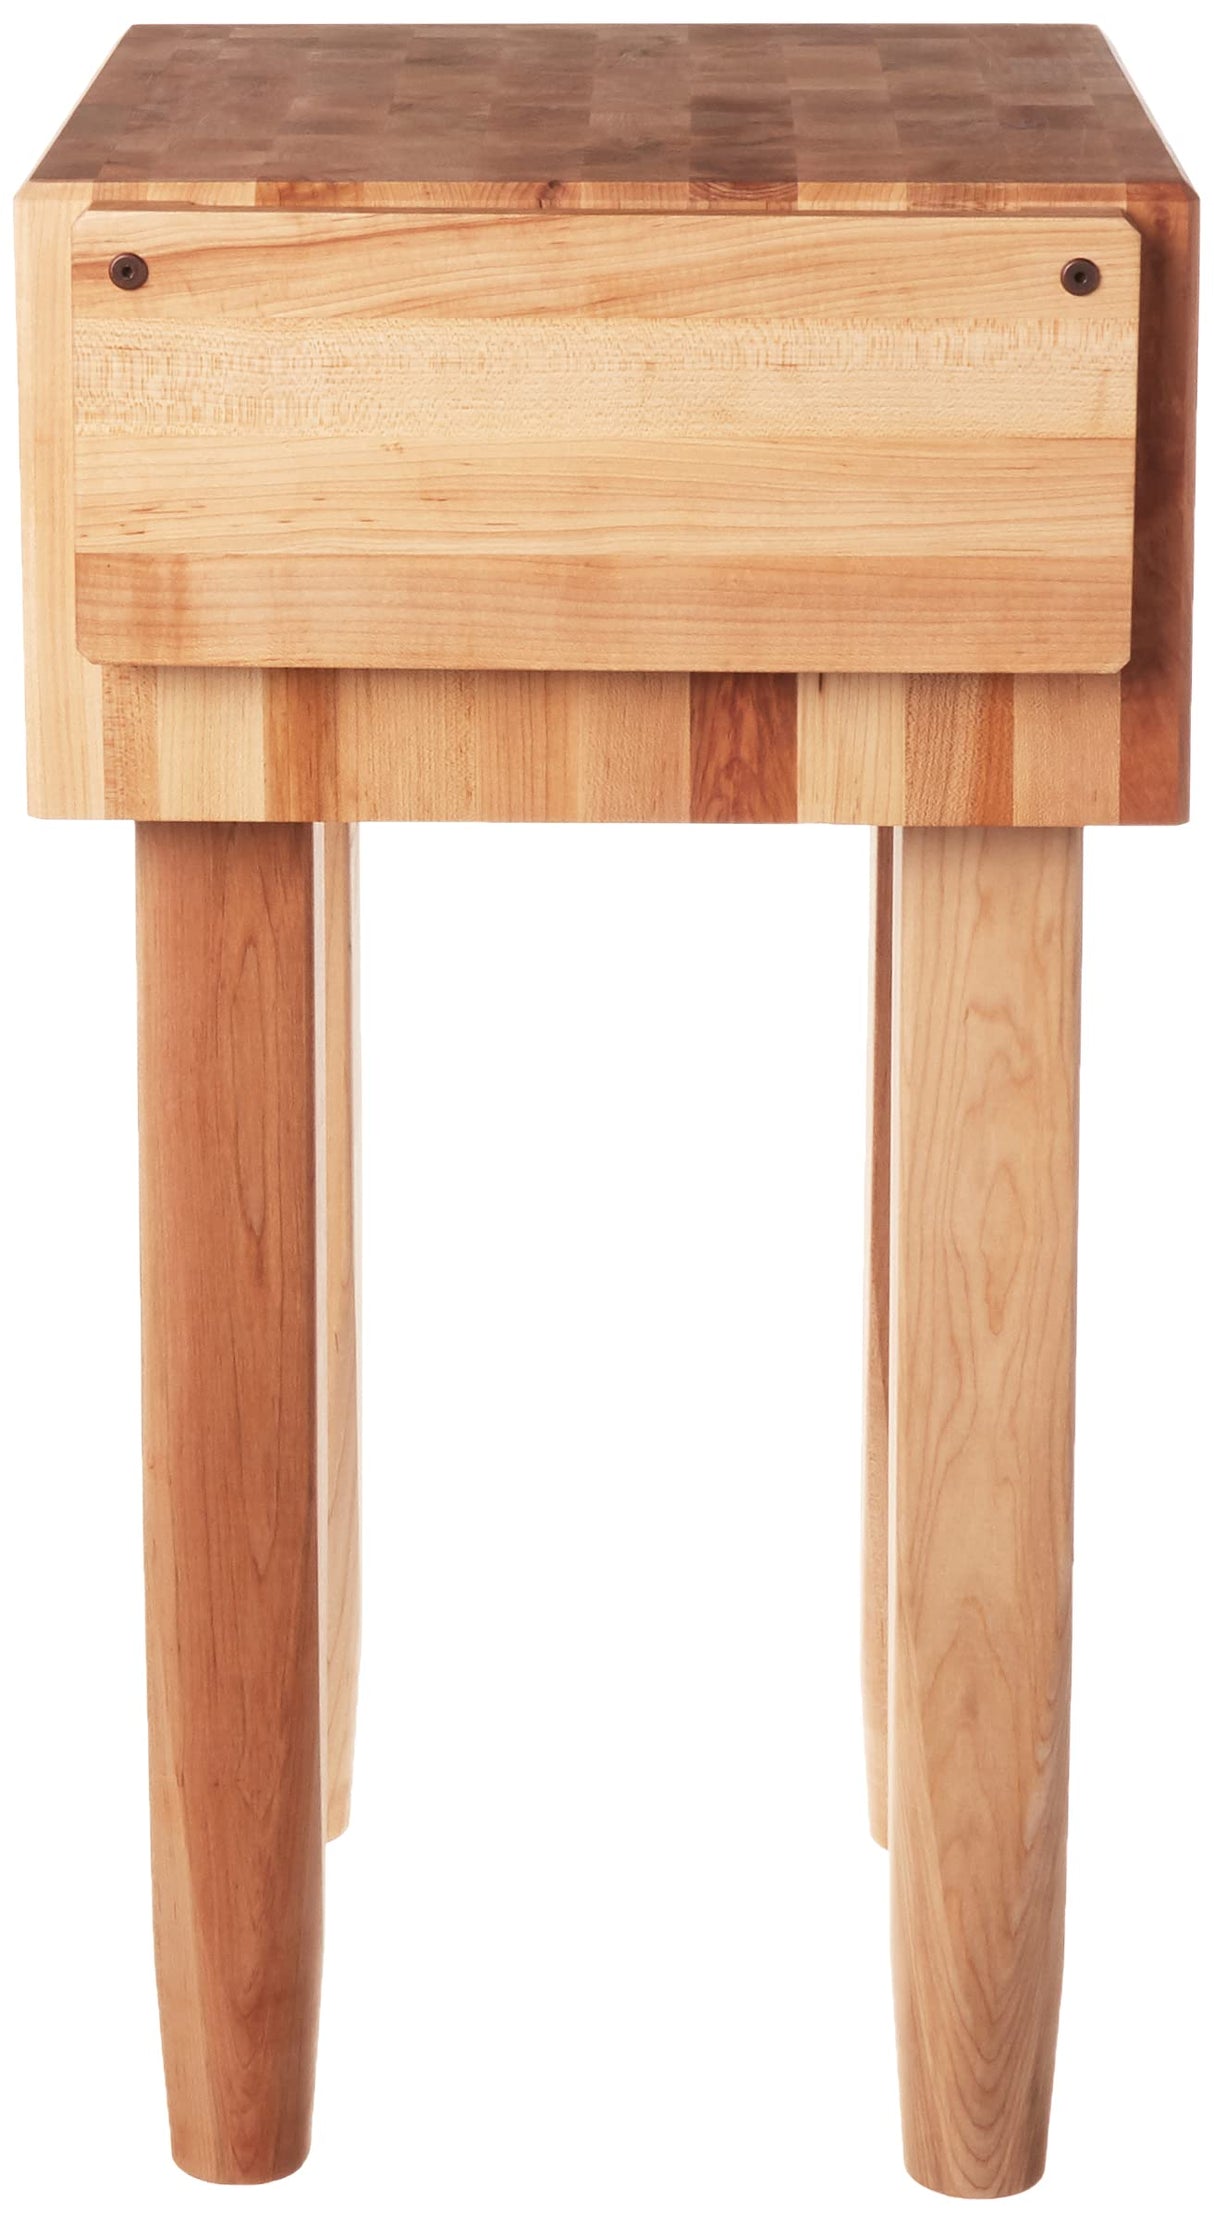 John Boos PCA1 Maple Wood End Grain Solid Butcher Block with Side Knife Slot, 18 Inches x 10 Inch Top, 34 Tall, Natural Legs PCA BLOCK 18X18X10W/HOLDER CRM-